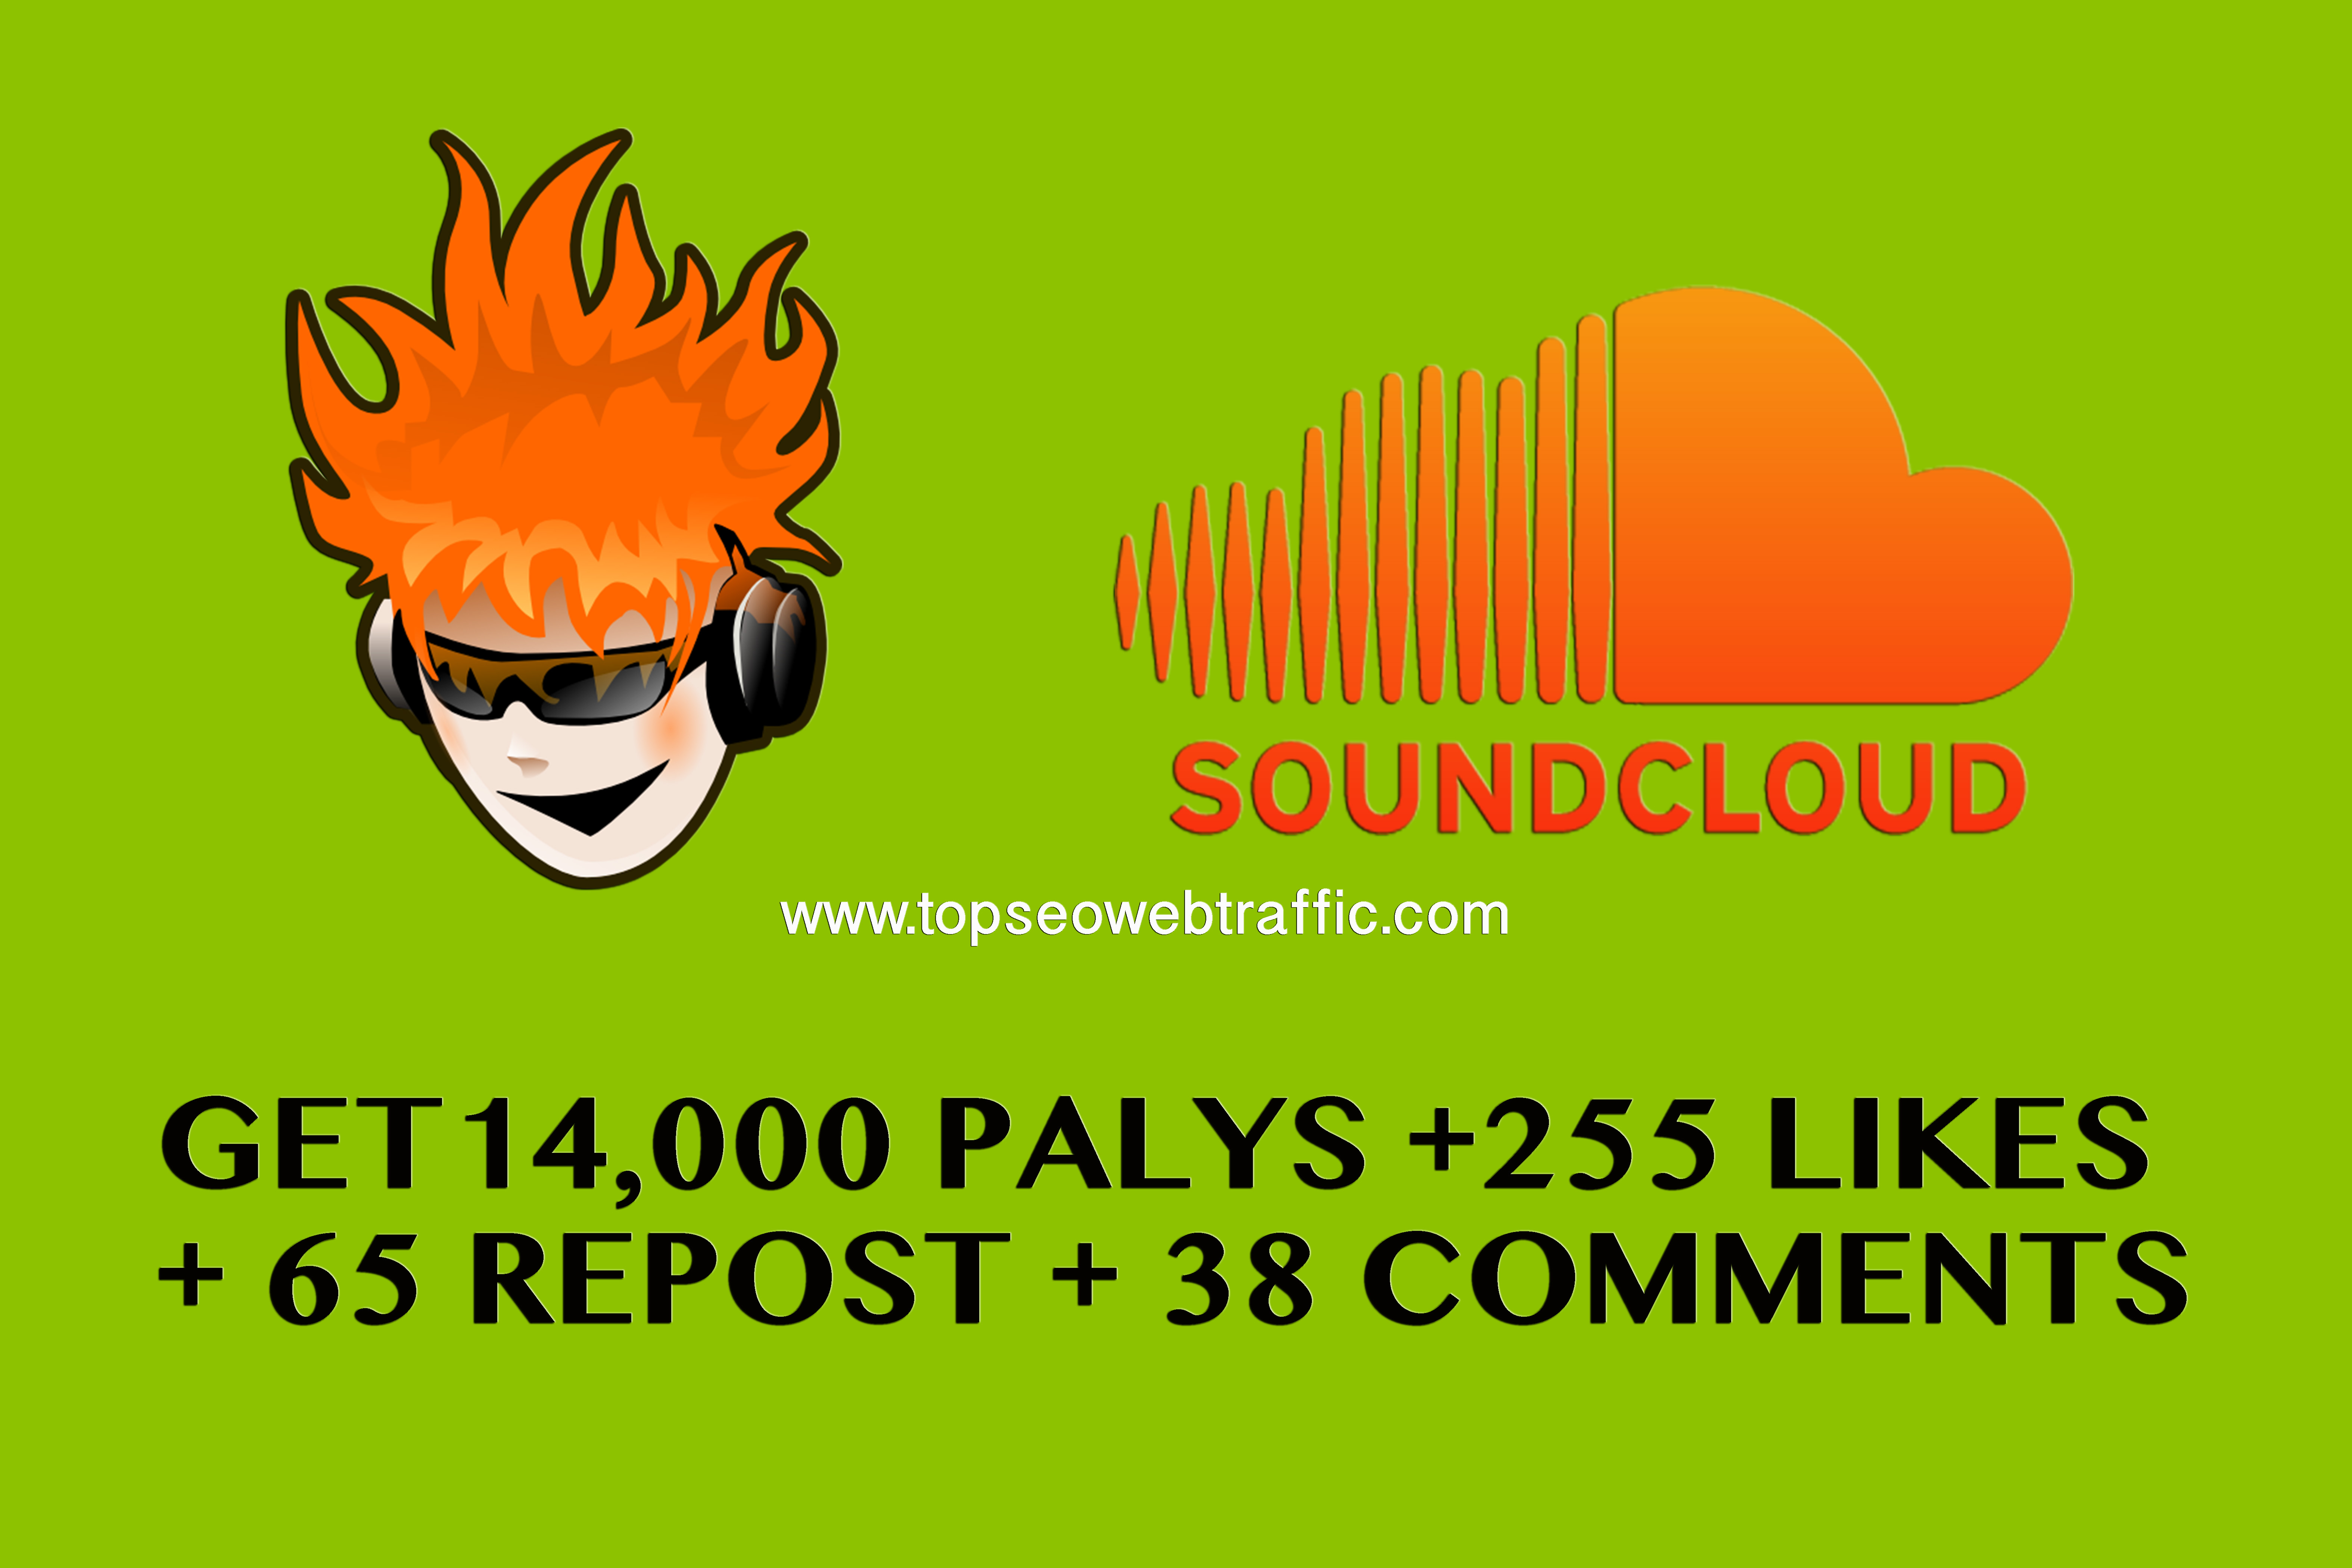 I WILL PROVIDE 14,000 PALYS+ 255 LIKES + 65 REPOST + 38 COMMENTS